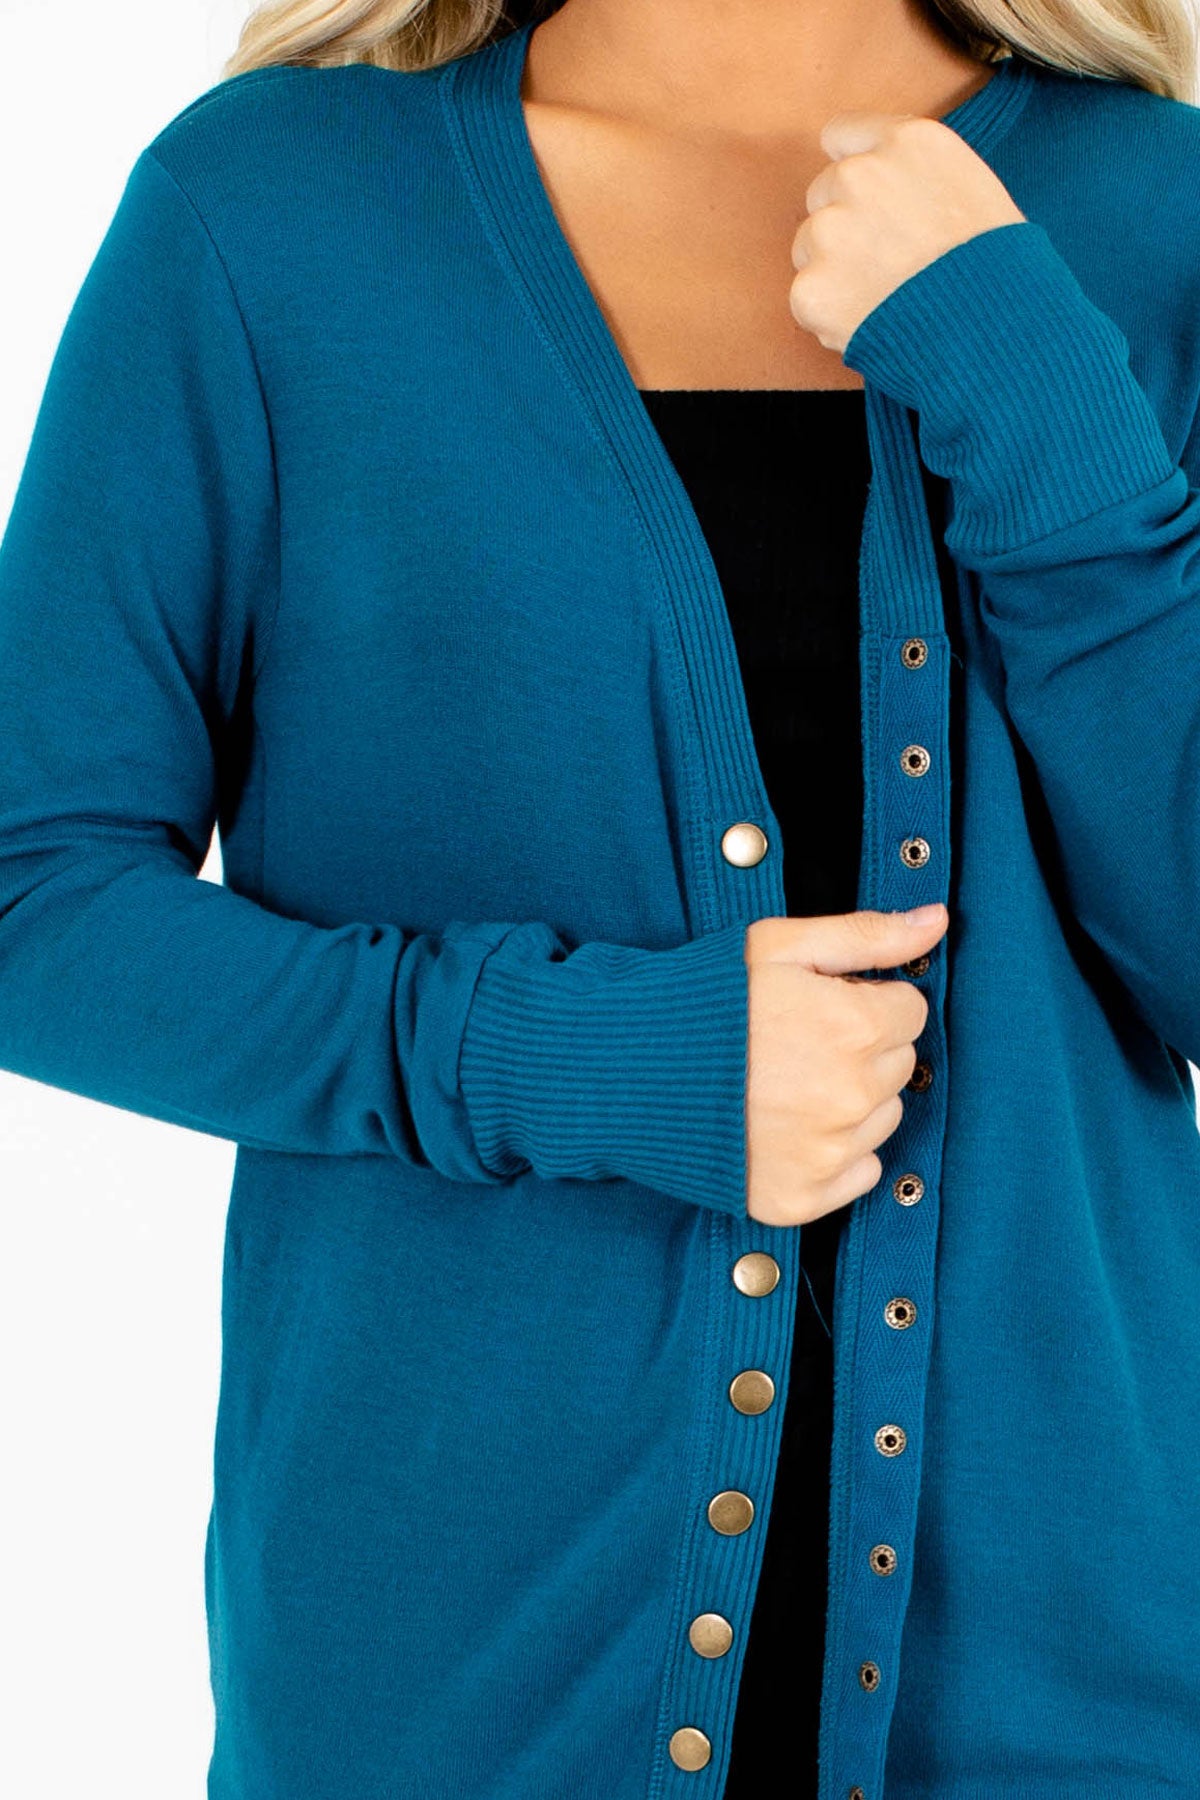 Snap Cardigan in Teal Blue